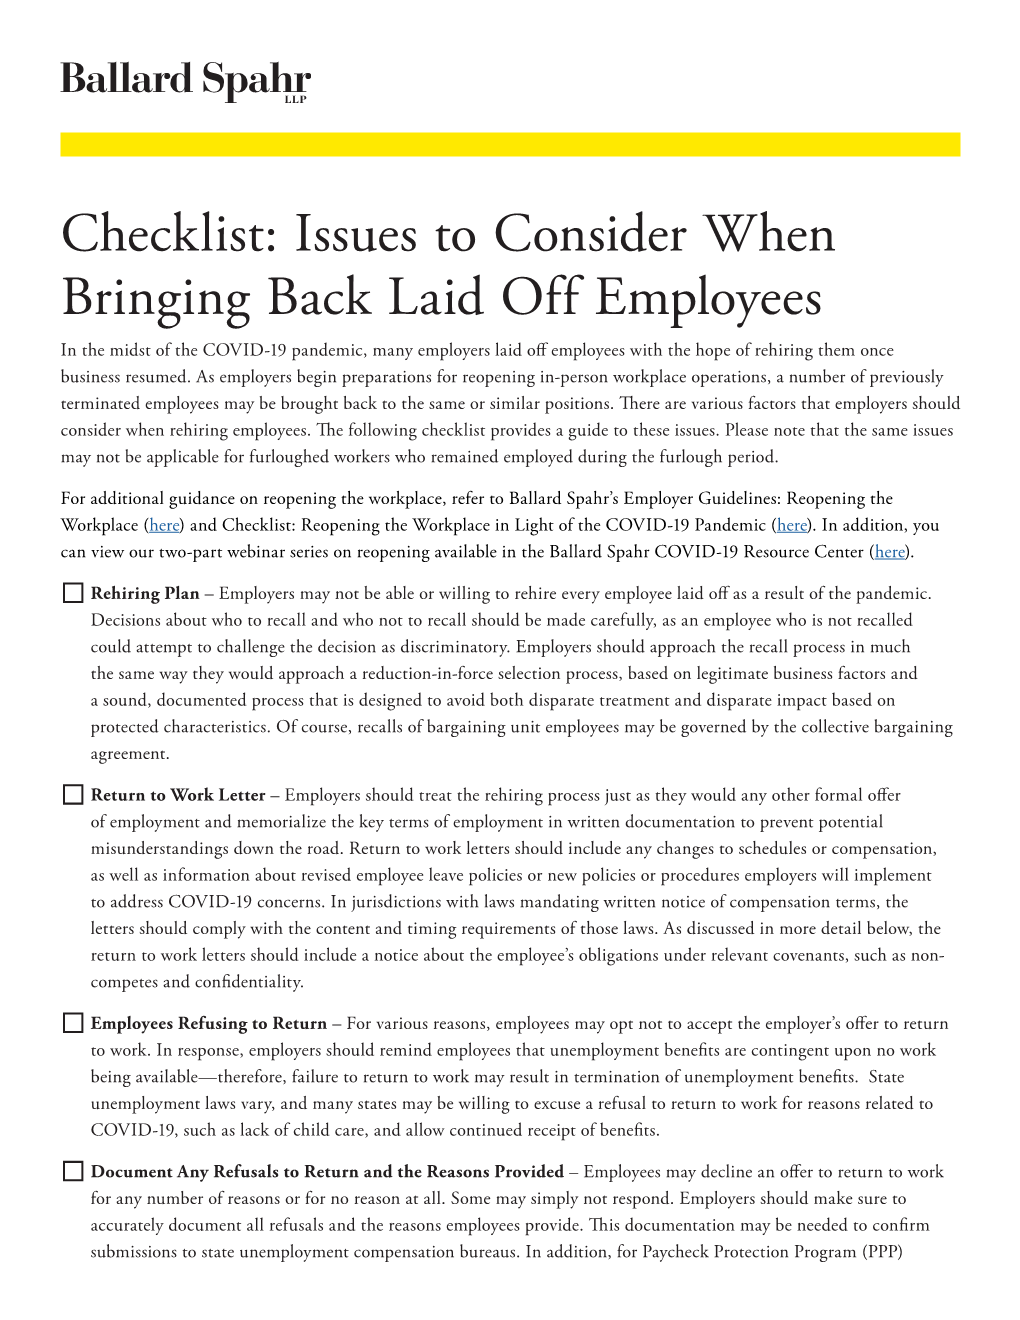 Checklist: Issues to Consider When Bringing Back Laid Off Employees